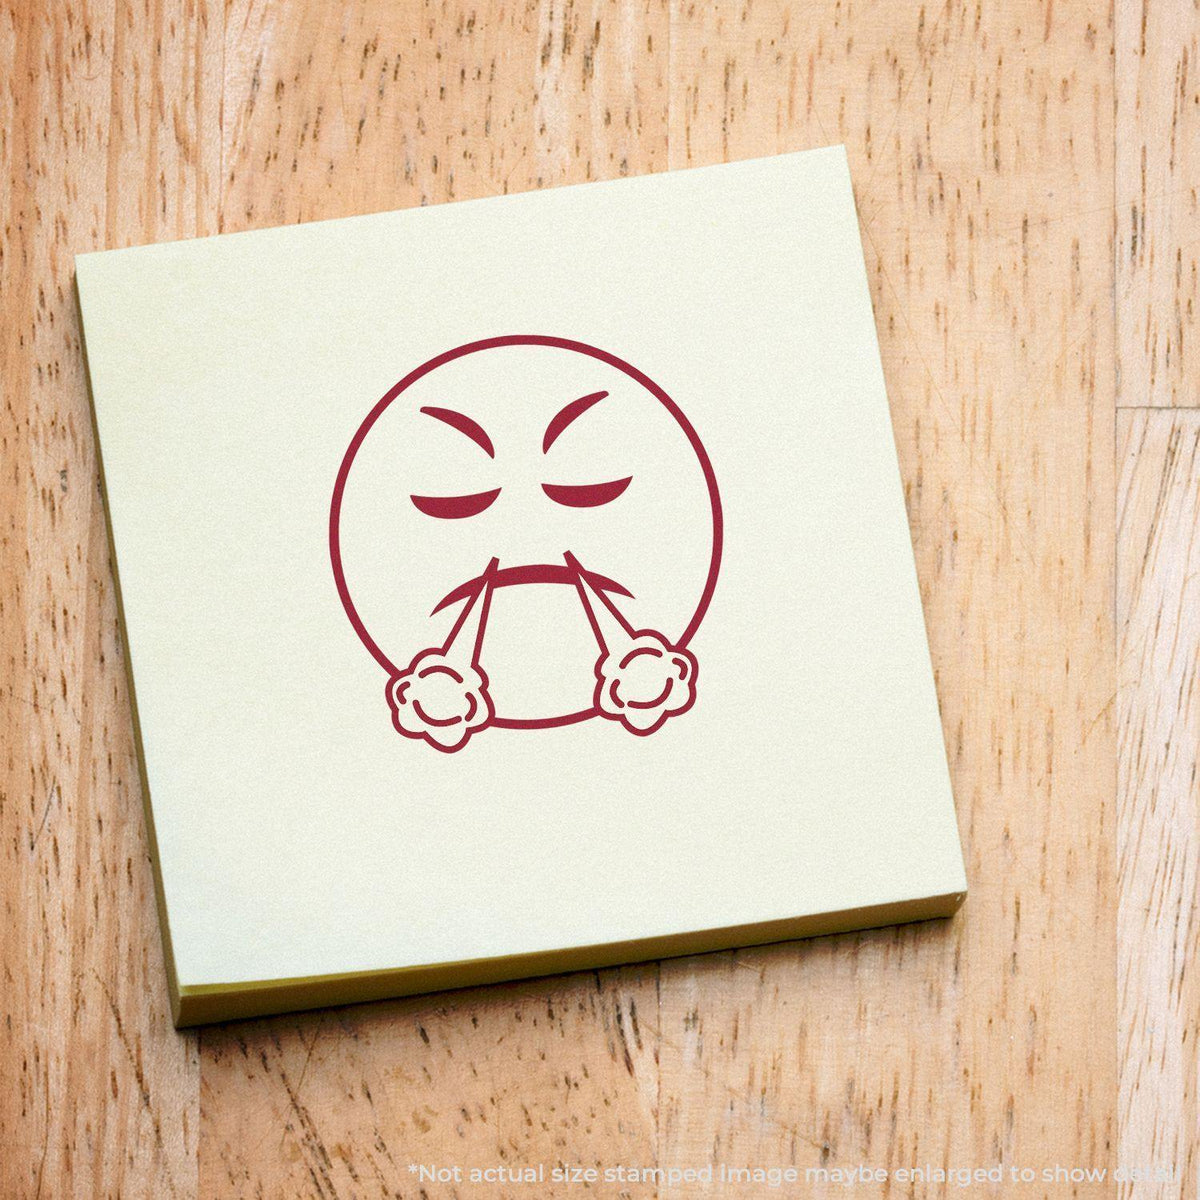 Round Angry Smiley Rubber Stamp - Engineer Seal Stamps - Brand_Acorn, Impression Size_Small, Stamp Type_Regular Stamp, Type of Use_General, Type of Use_Teacher